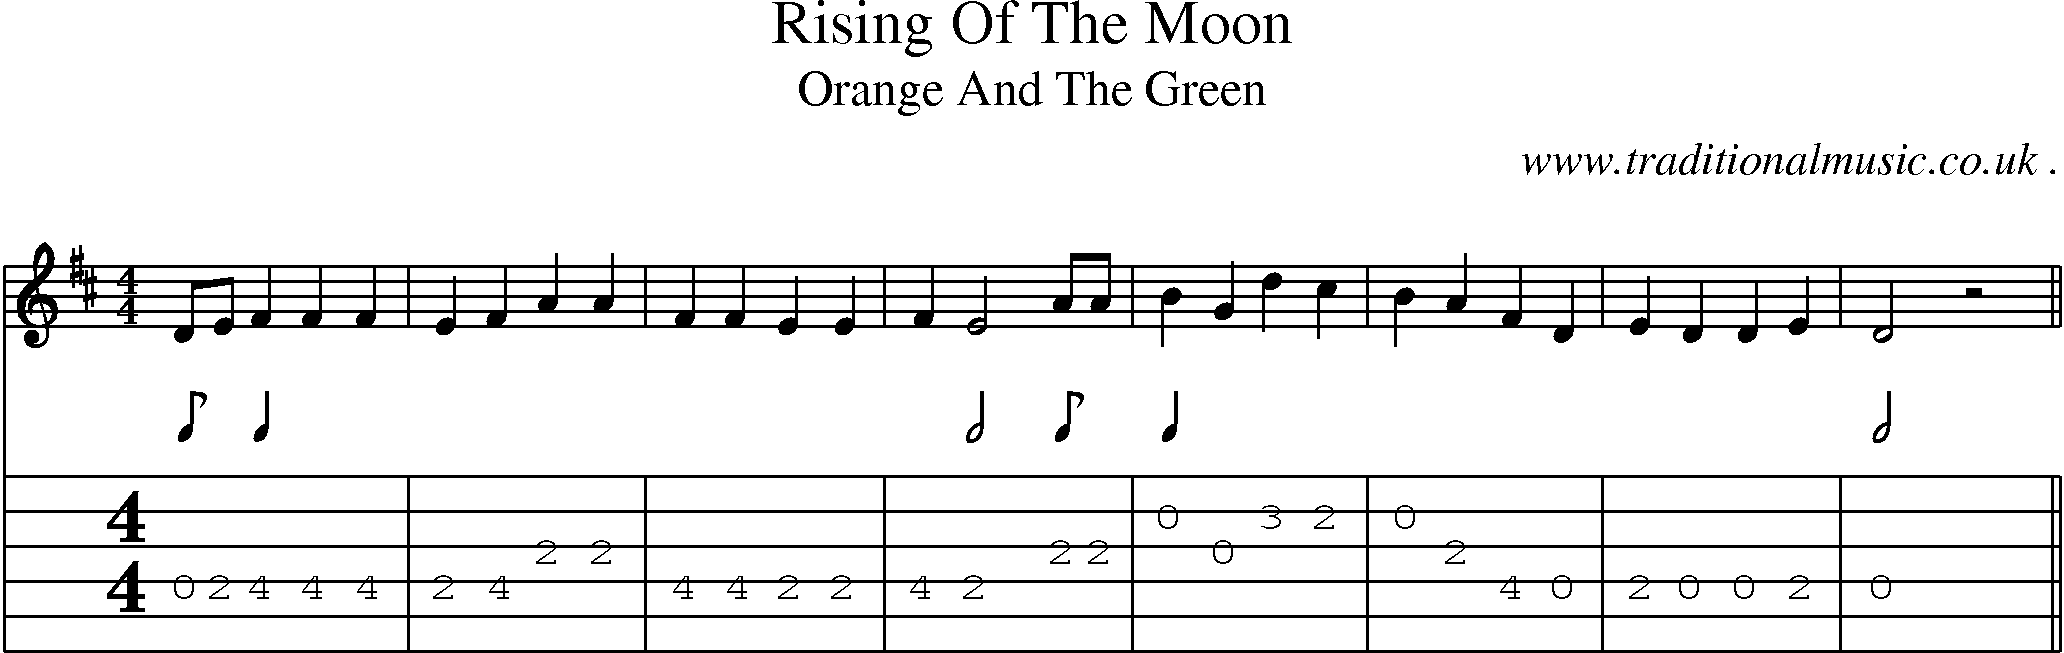 Sheet-Music and Guitar Tabs for Rising Of The Moon